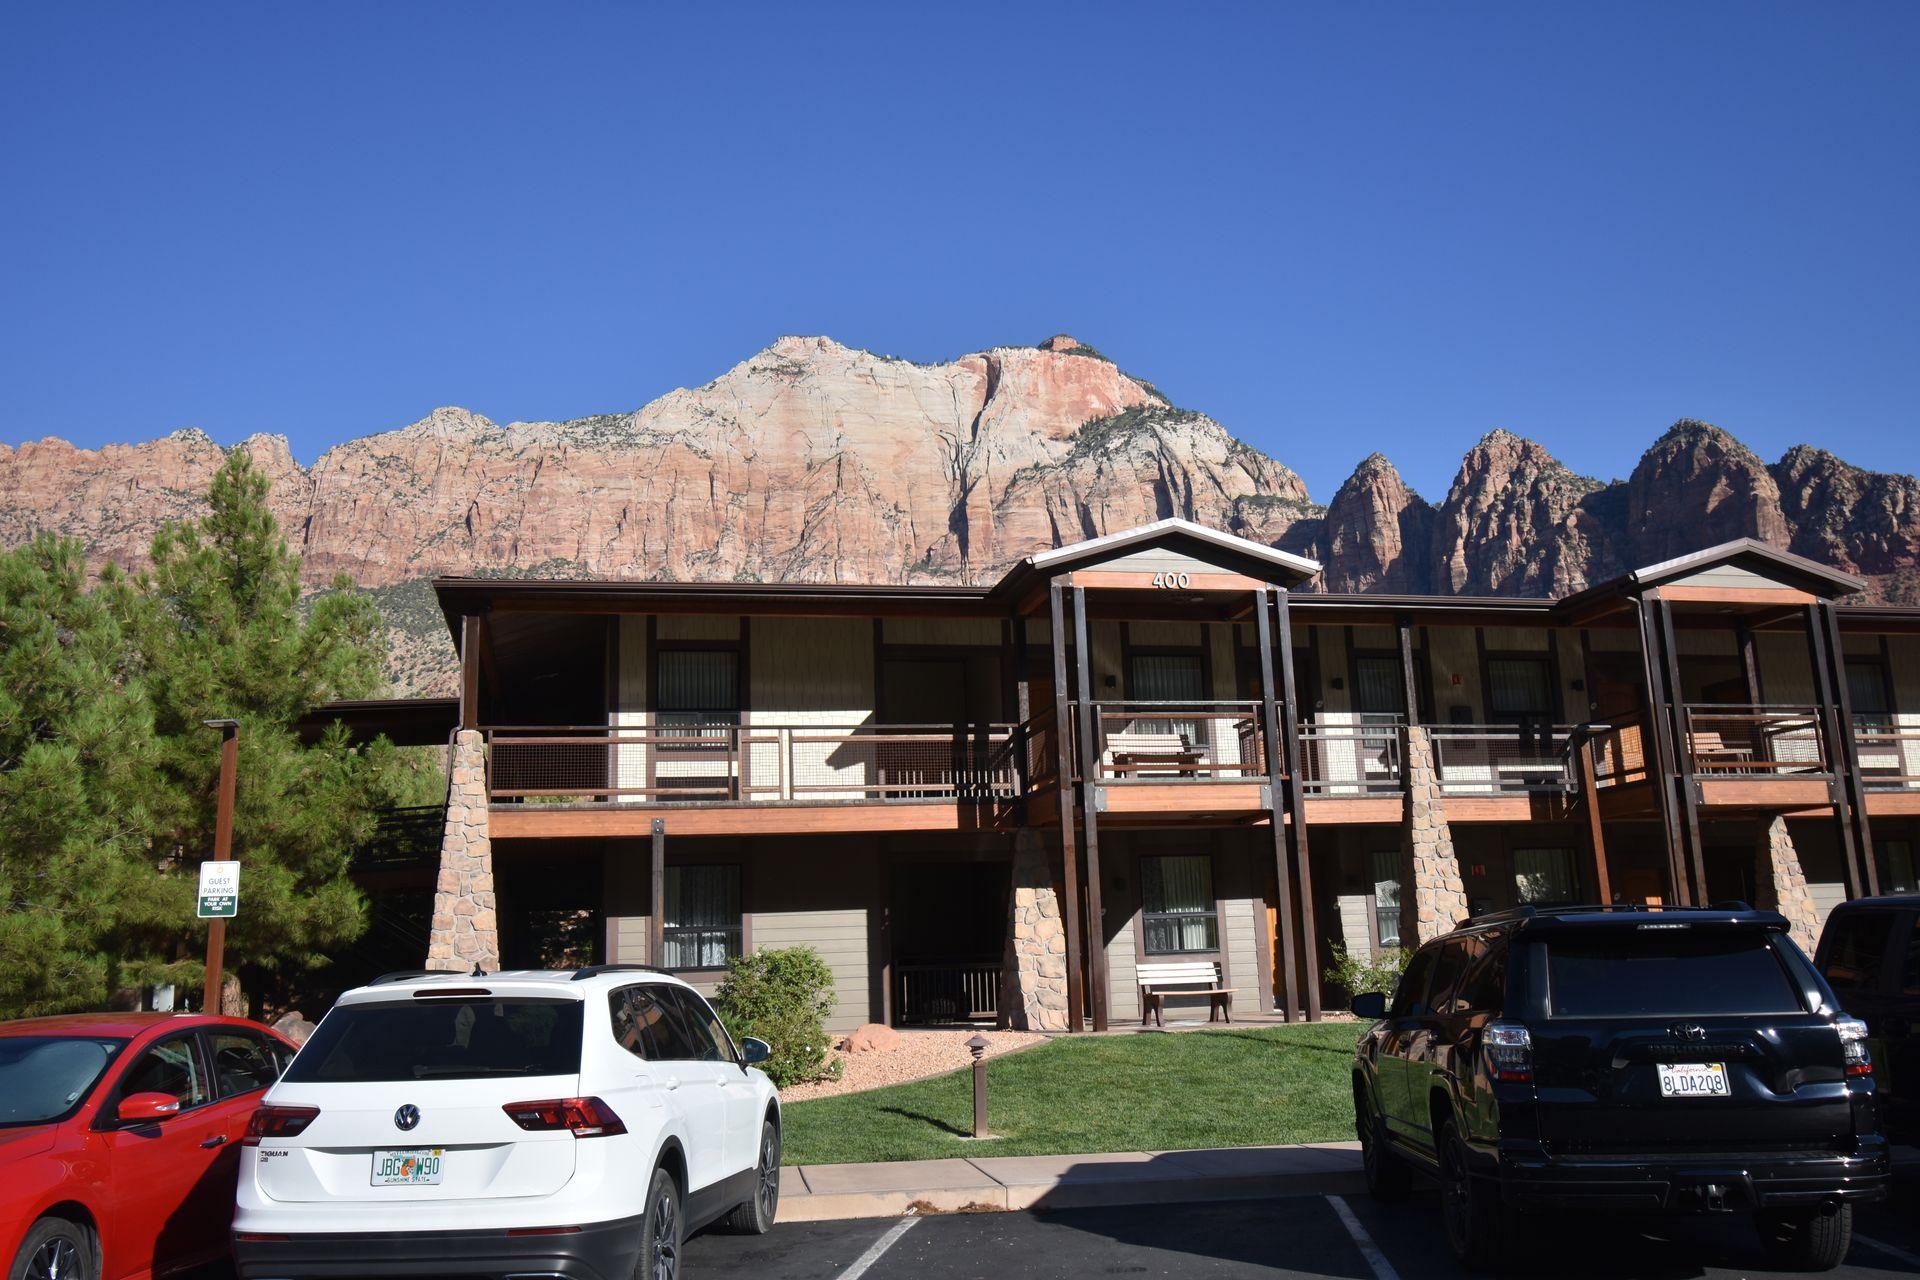 The exterior of La Quinta in Springdale, UT. There are red rock cliffs behind the hotel.